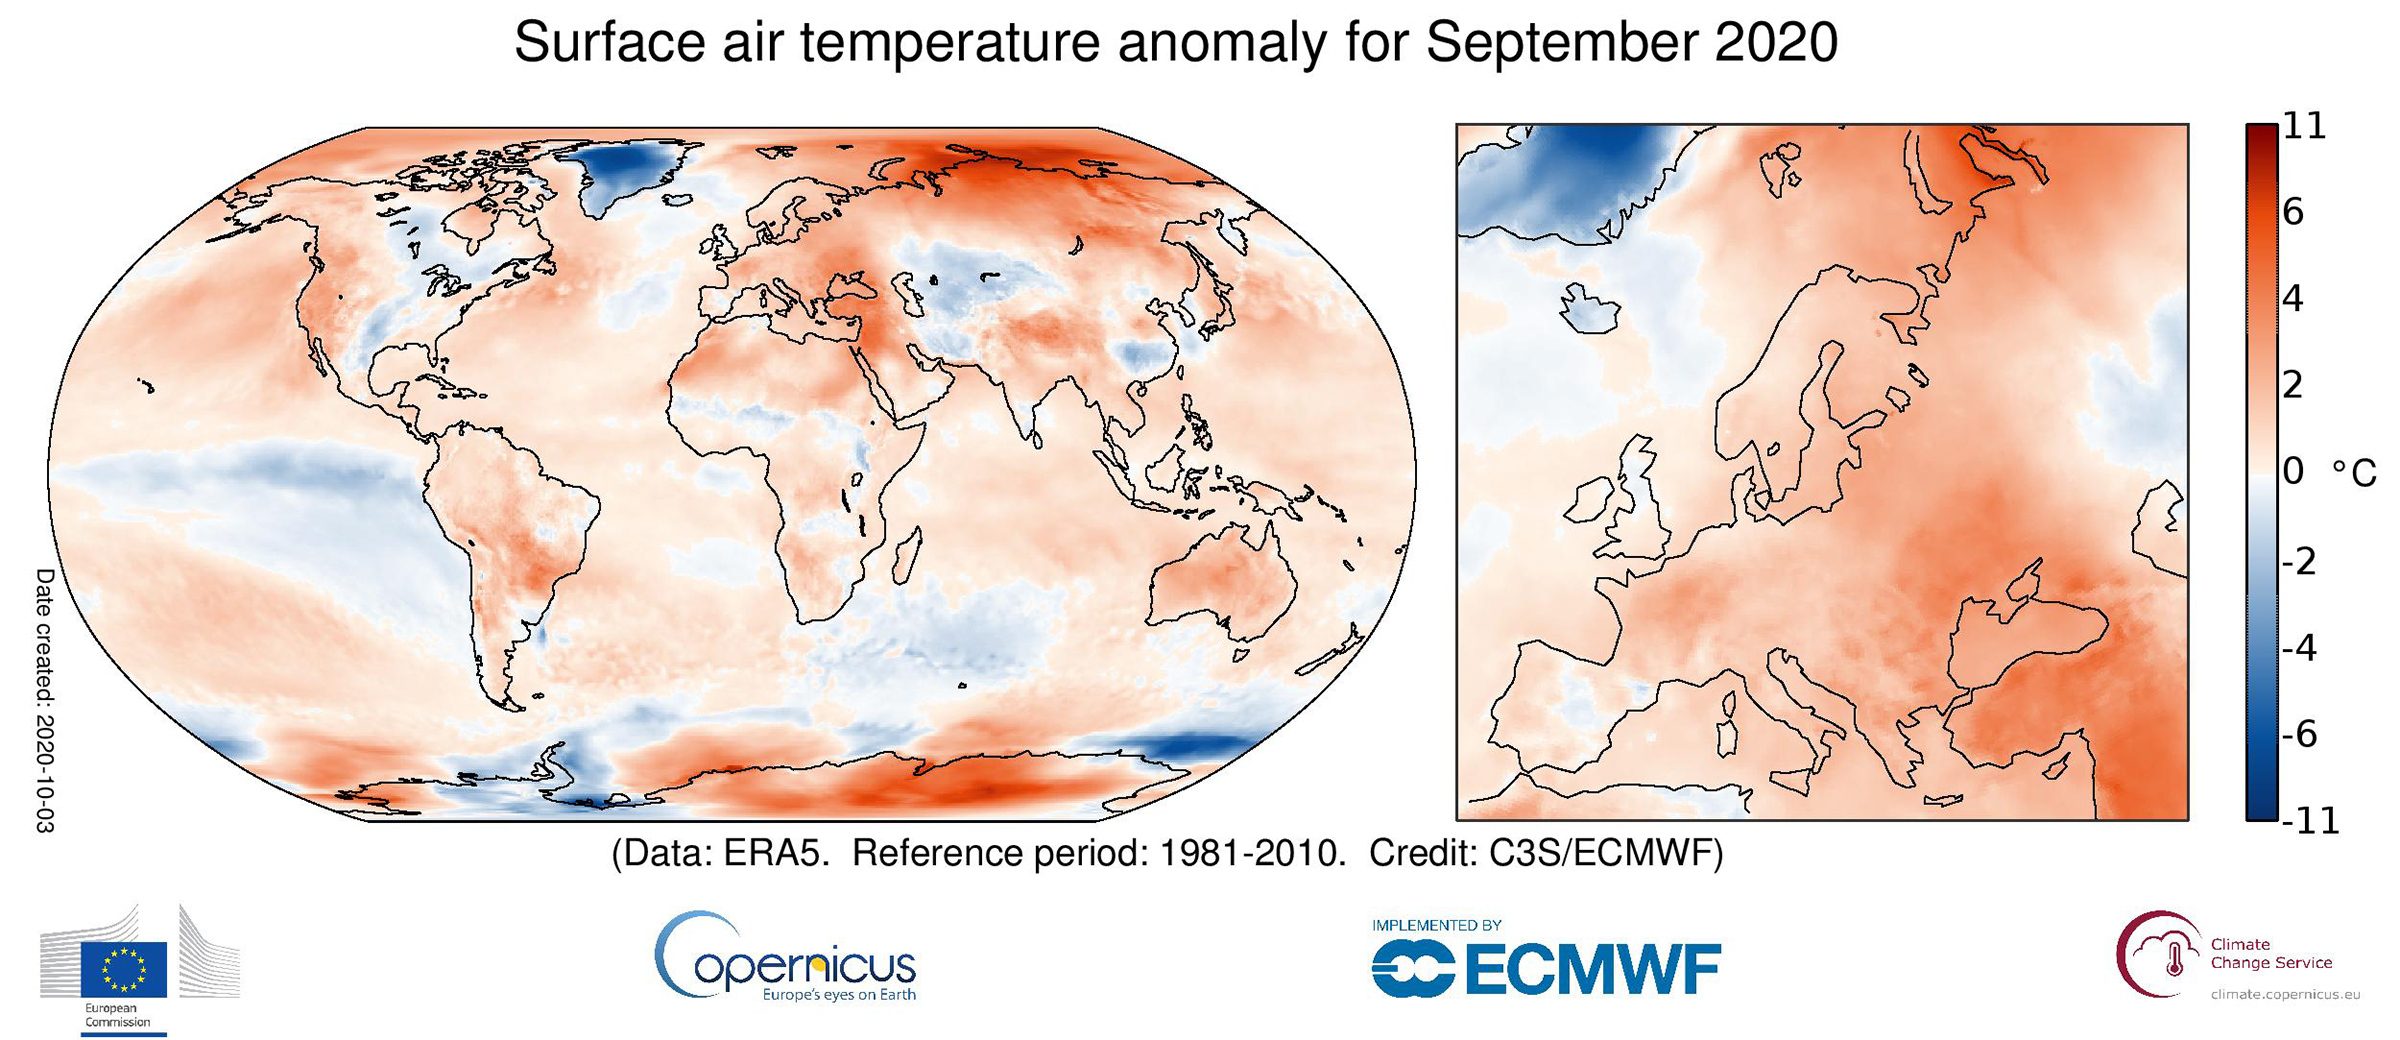 Surface air temperature anomaly for September 2020 relative to the September average for the period 1981-2010. Data source: ERA5. (Copernicus Climate Change Service/ECMWF.)